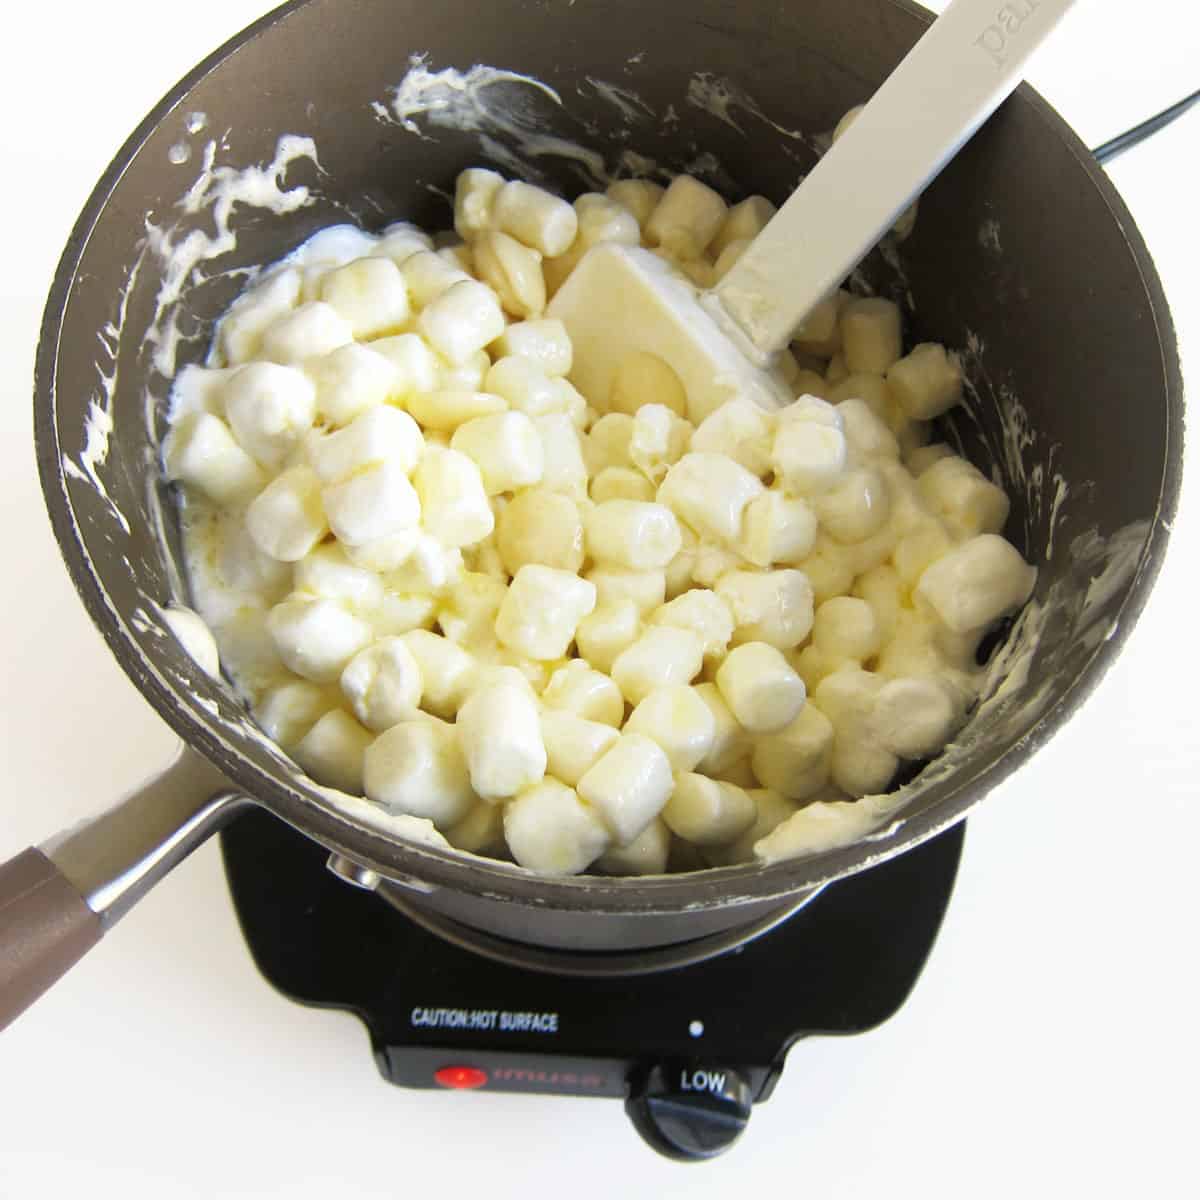 mixing melted butter with mini marshmallows and white candy melts.